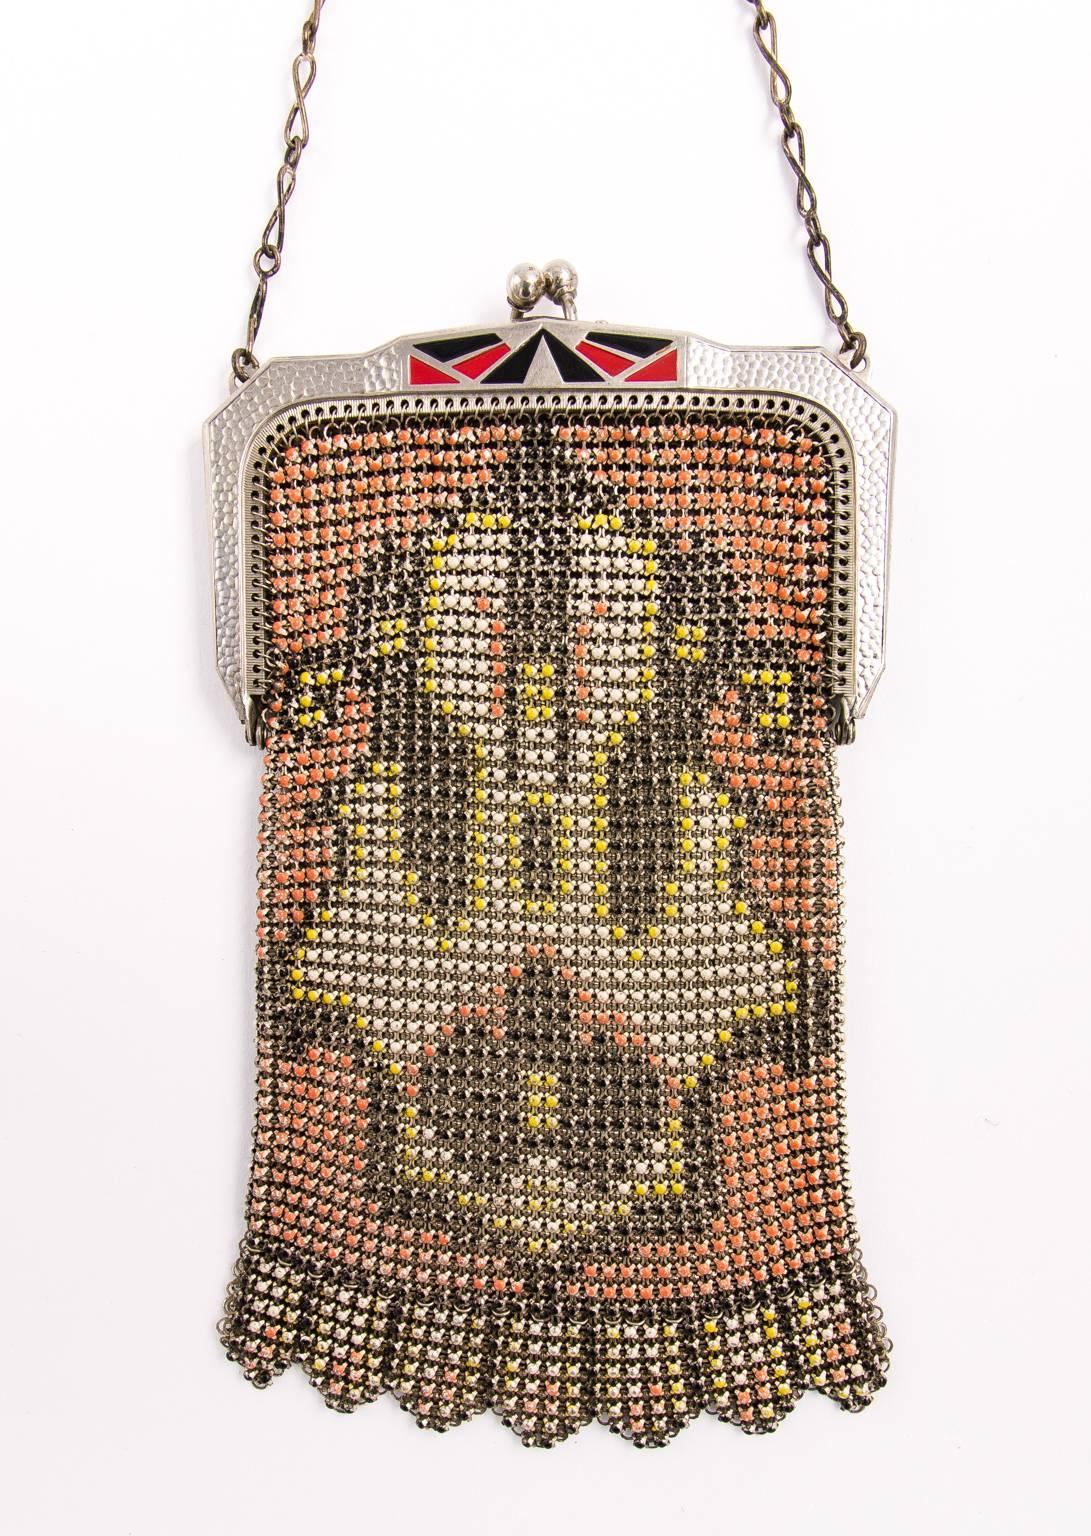 1930's Art Deco purse in black and yellow For Sale 1